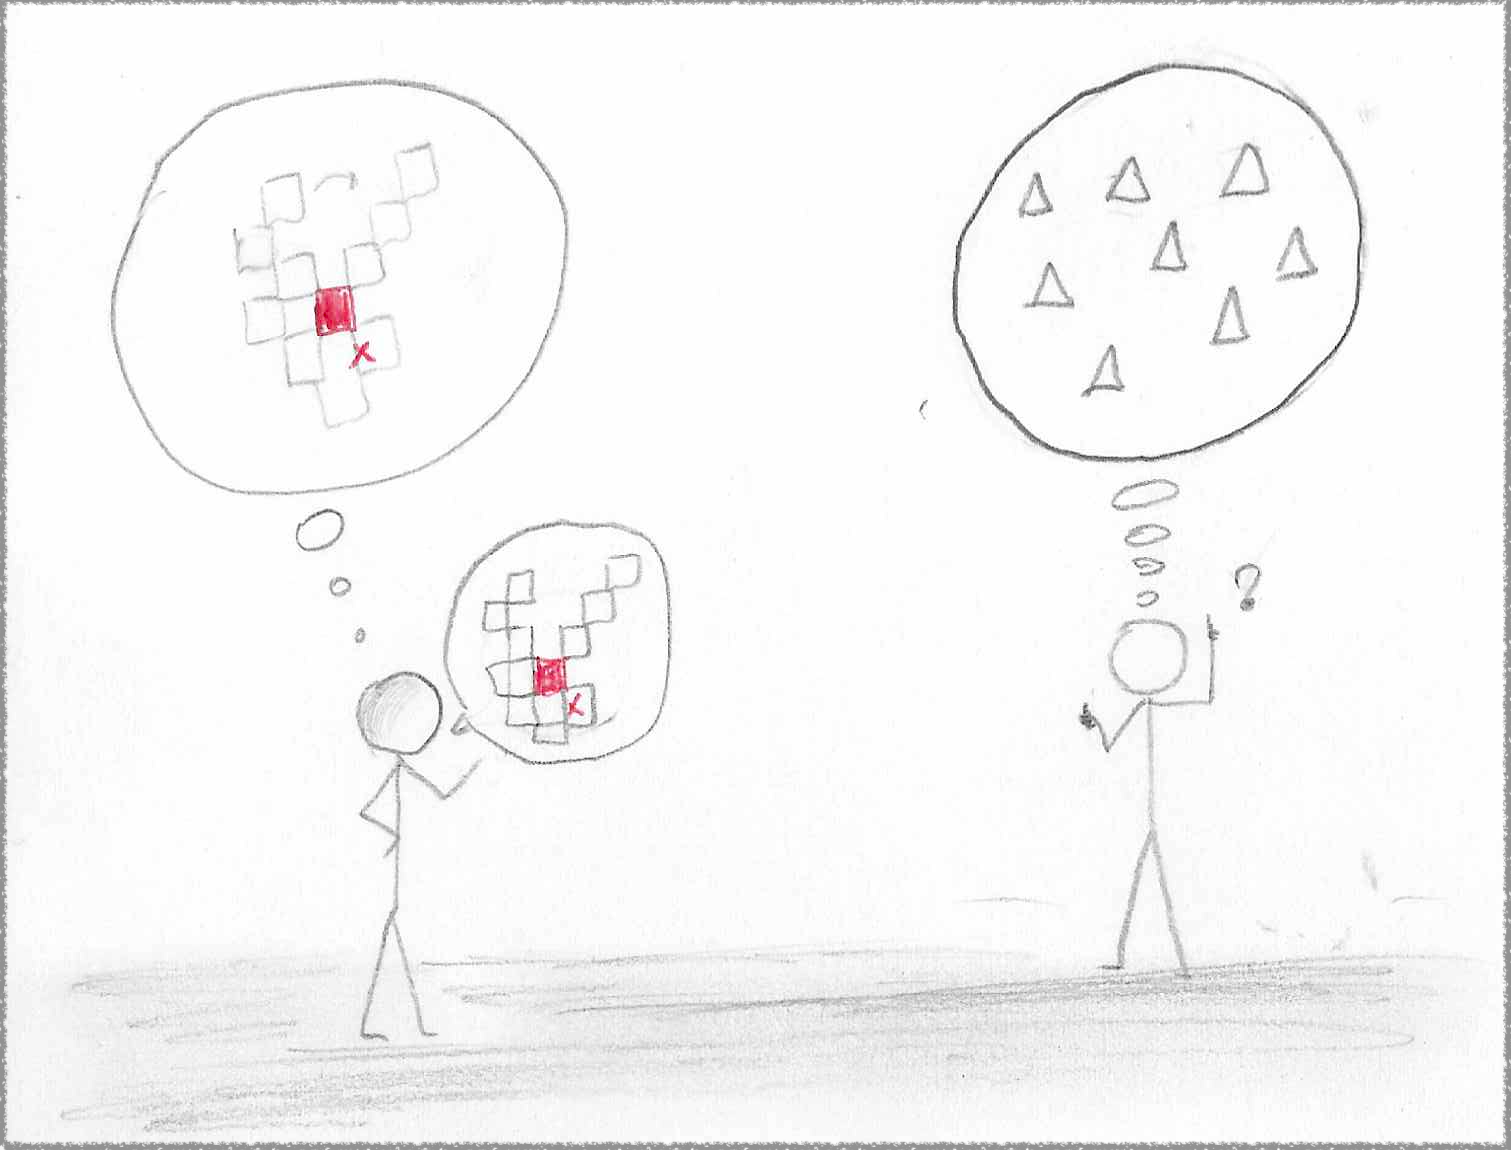 Sticky figure drawing of a person explaining an error to another person. Both are thinking about a system diagram, but the diagrams imagined by each person are completely different.